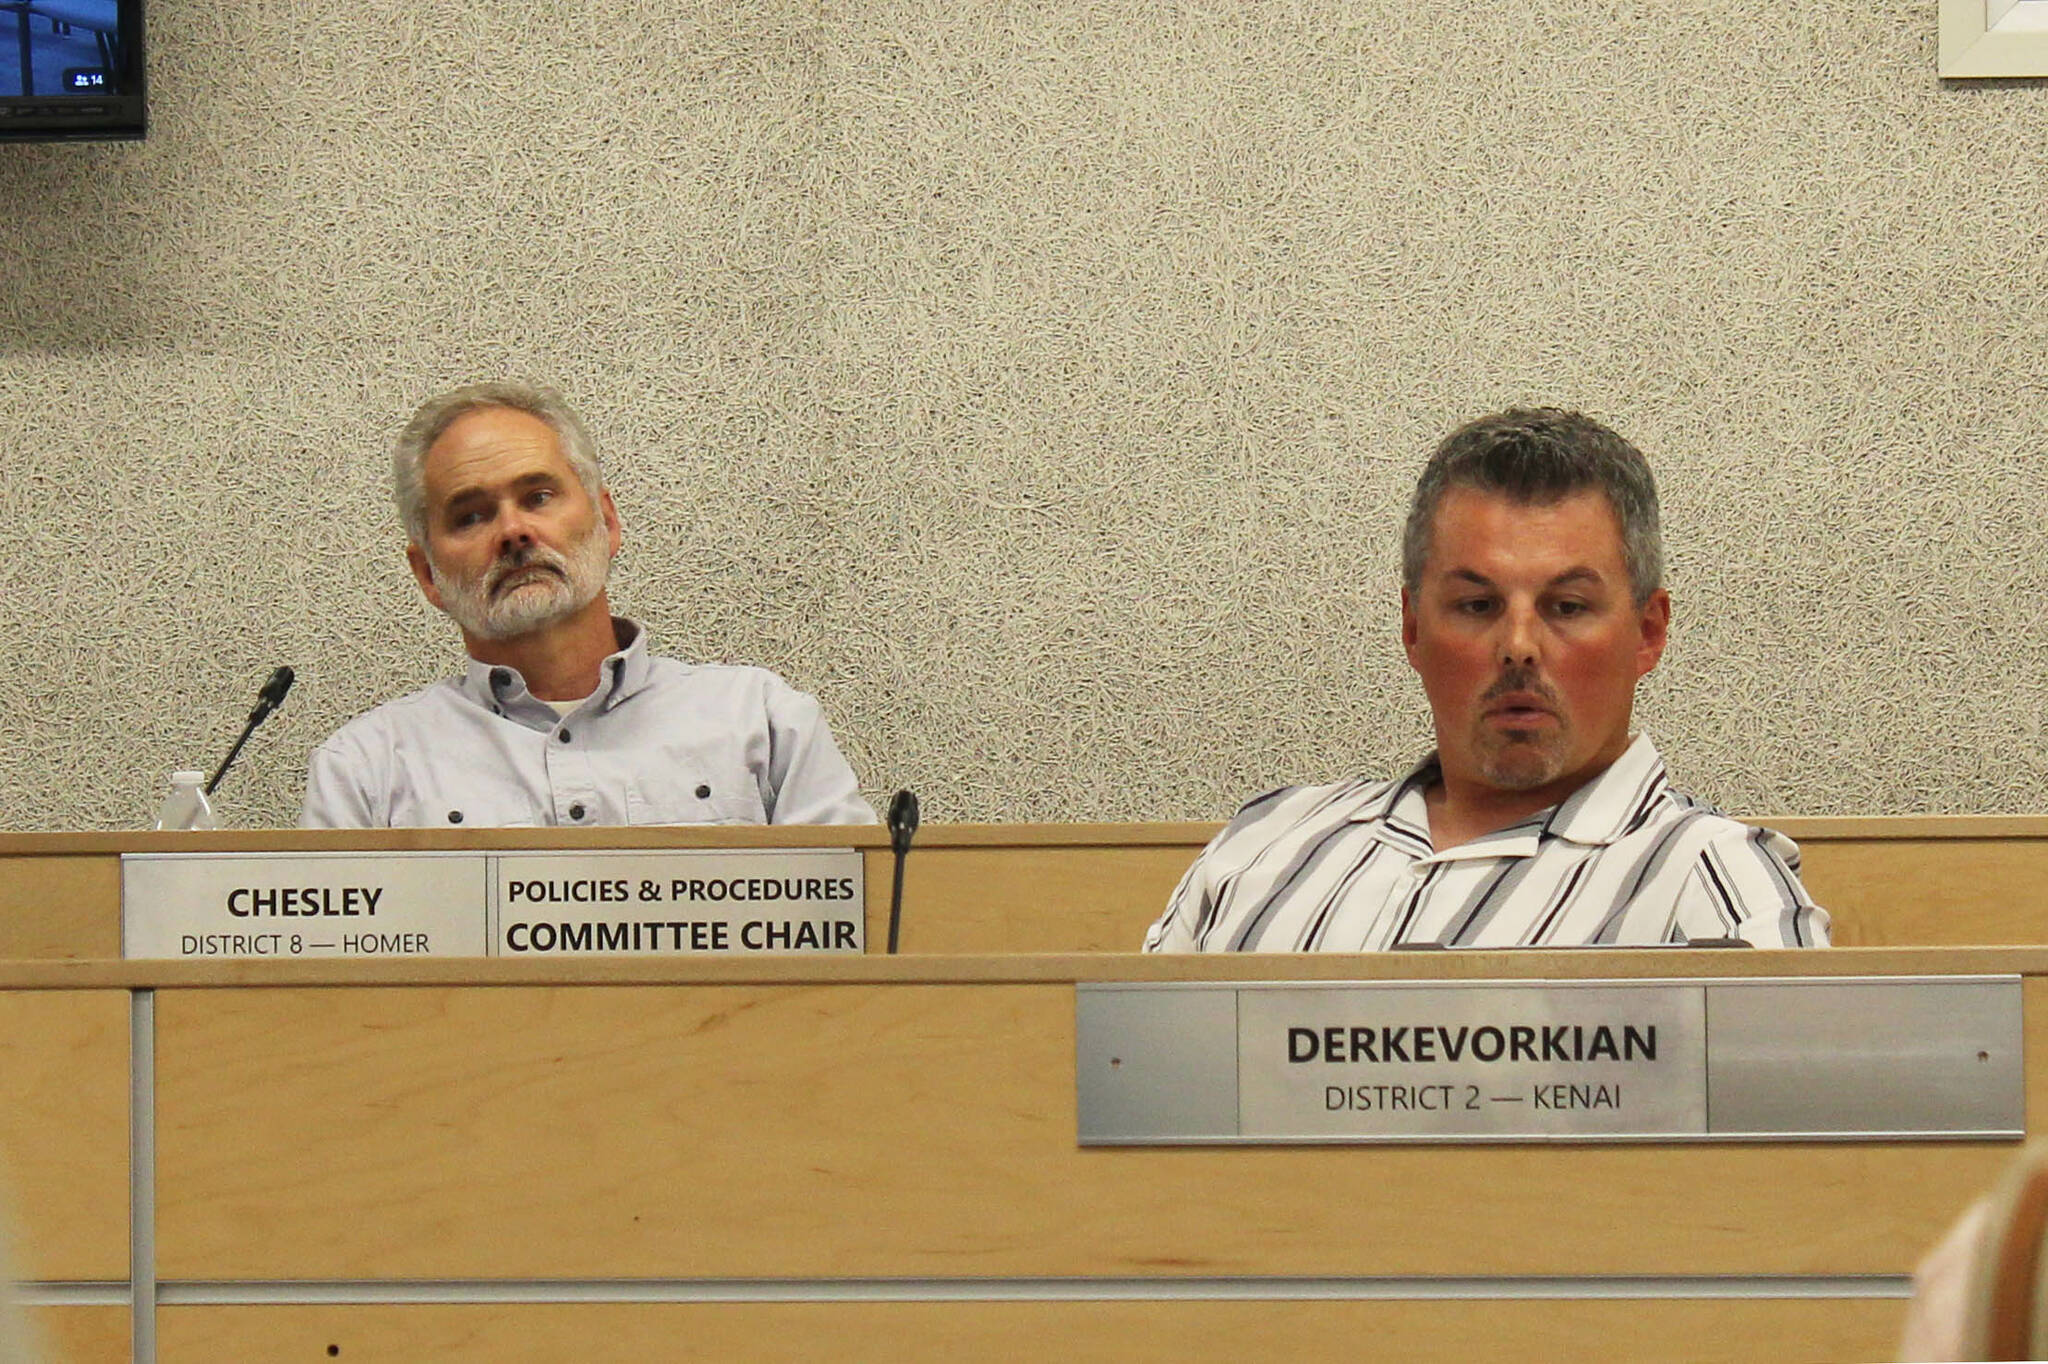 Assembly members Lane Chesley (left) and Richard Derkevorkian (right) participate in a borough assembly meeting on Tuesday, Aug. 1, 2023, in Soldotna, Alaska. (Ashlyn O’Haara/Peninsula Clarion)